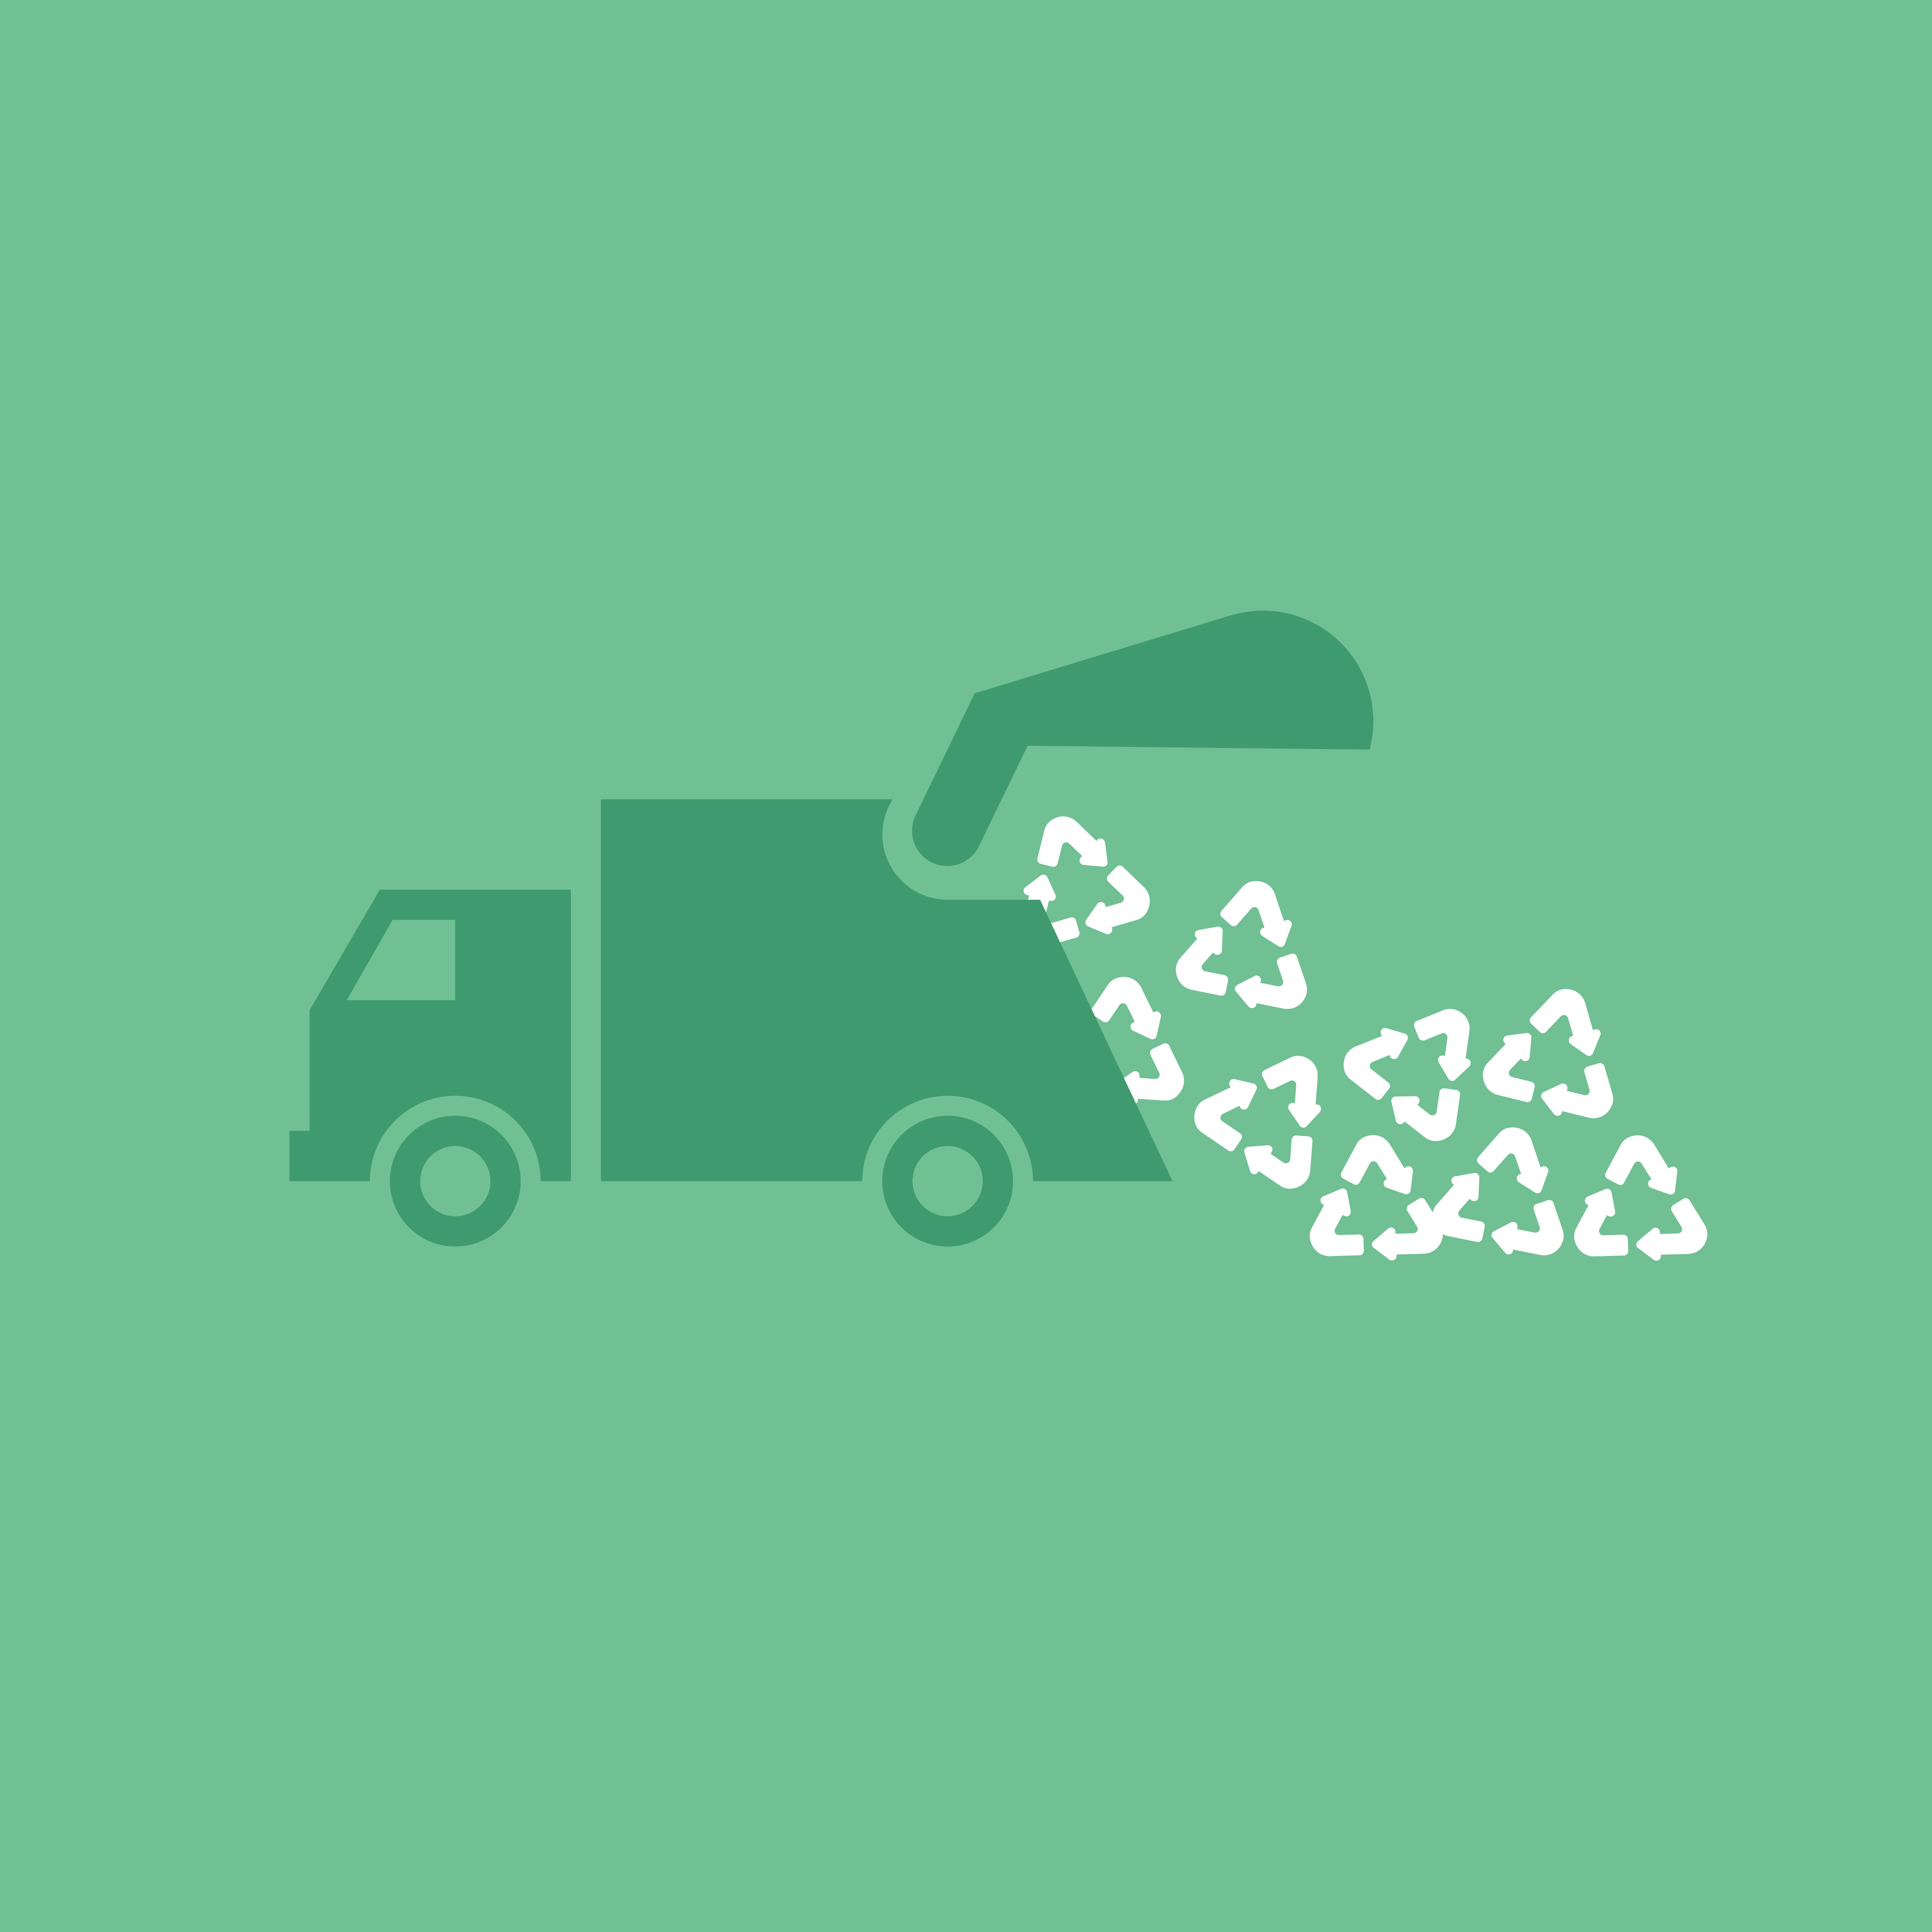 How much of your recycling ends up in the landfill?